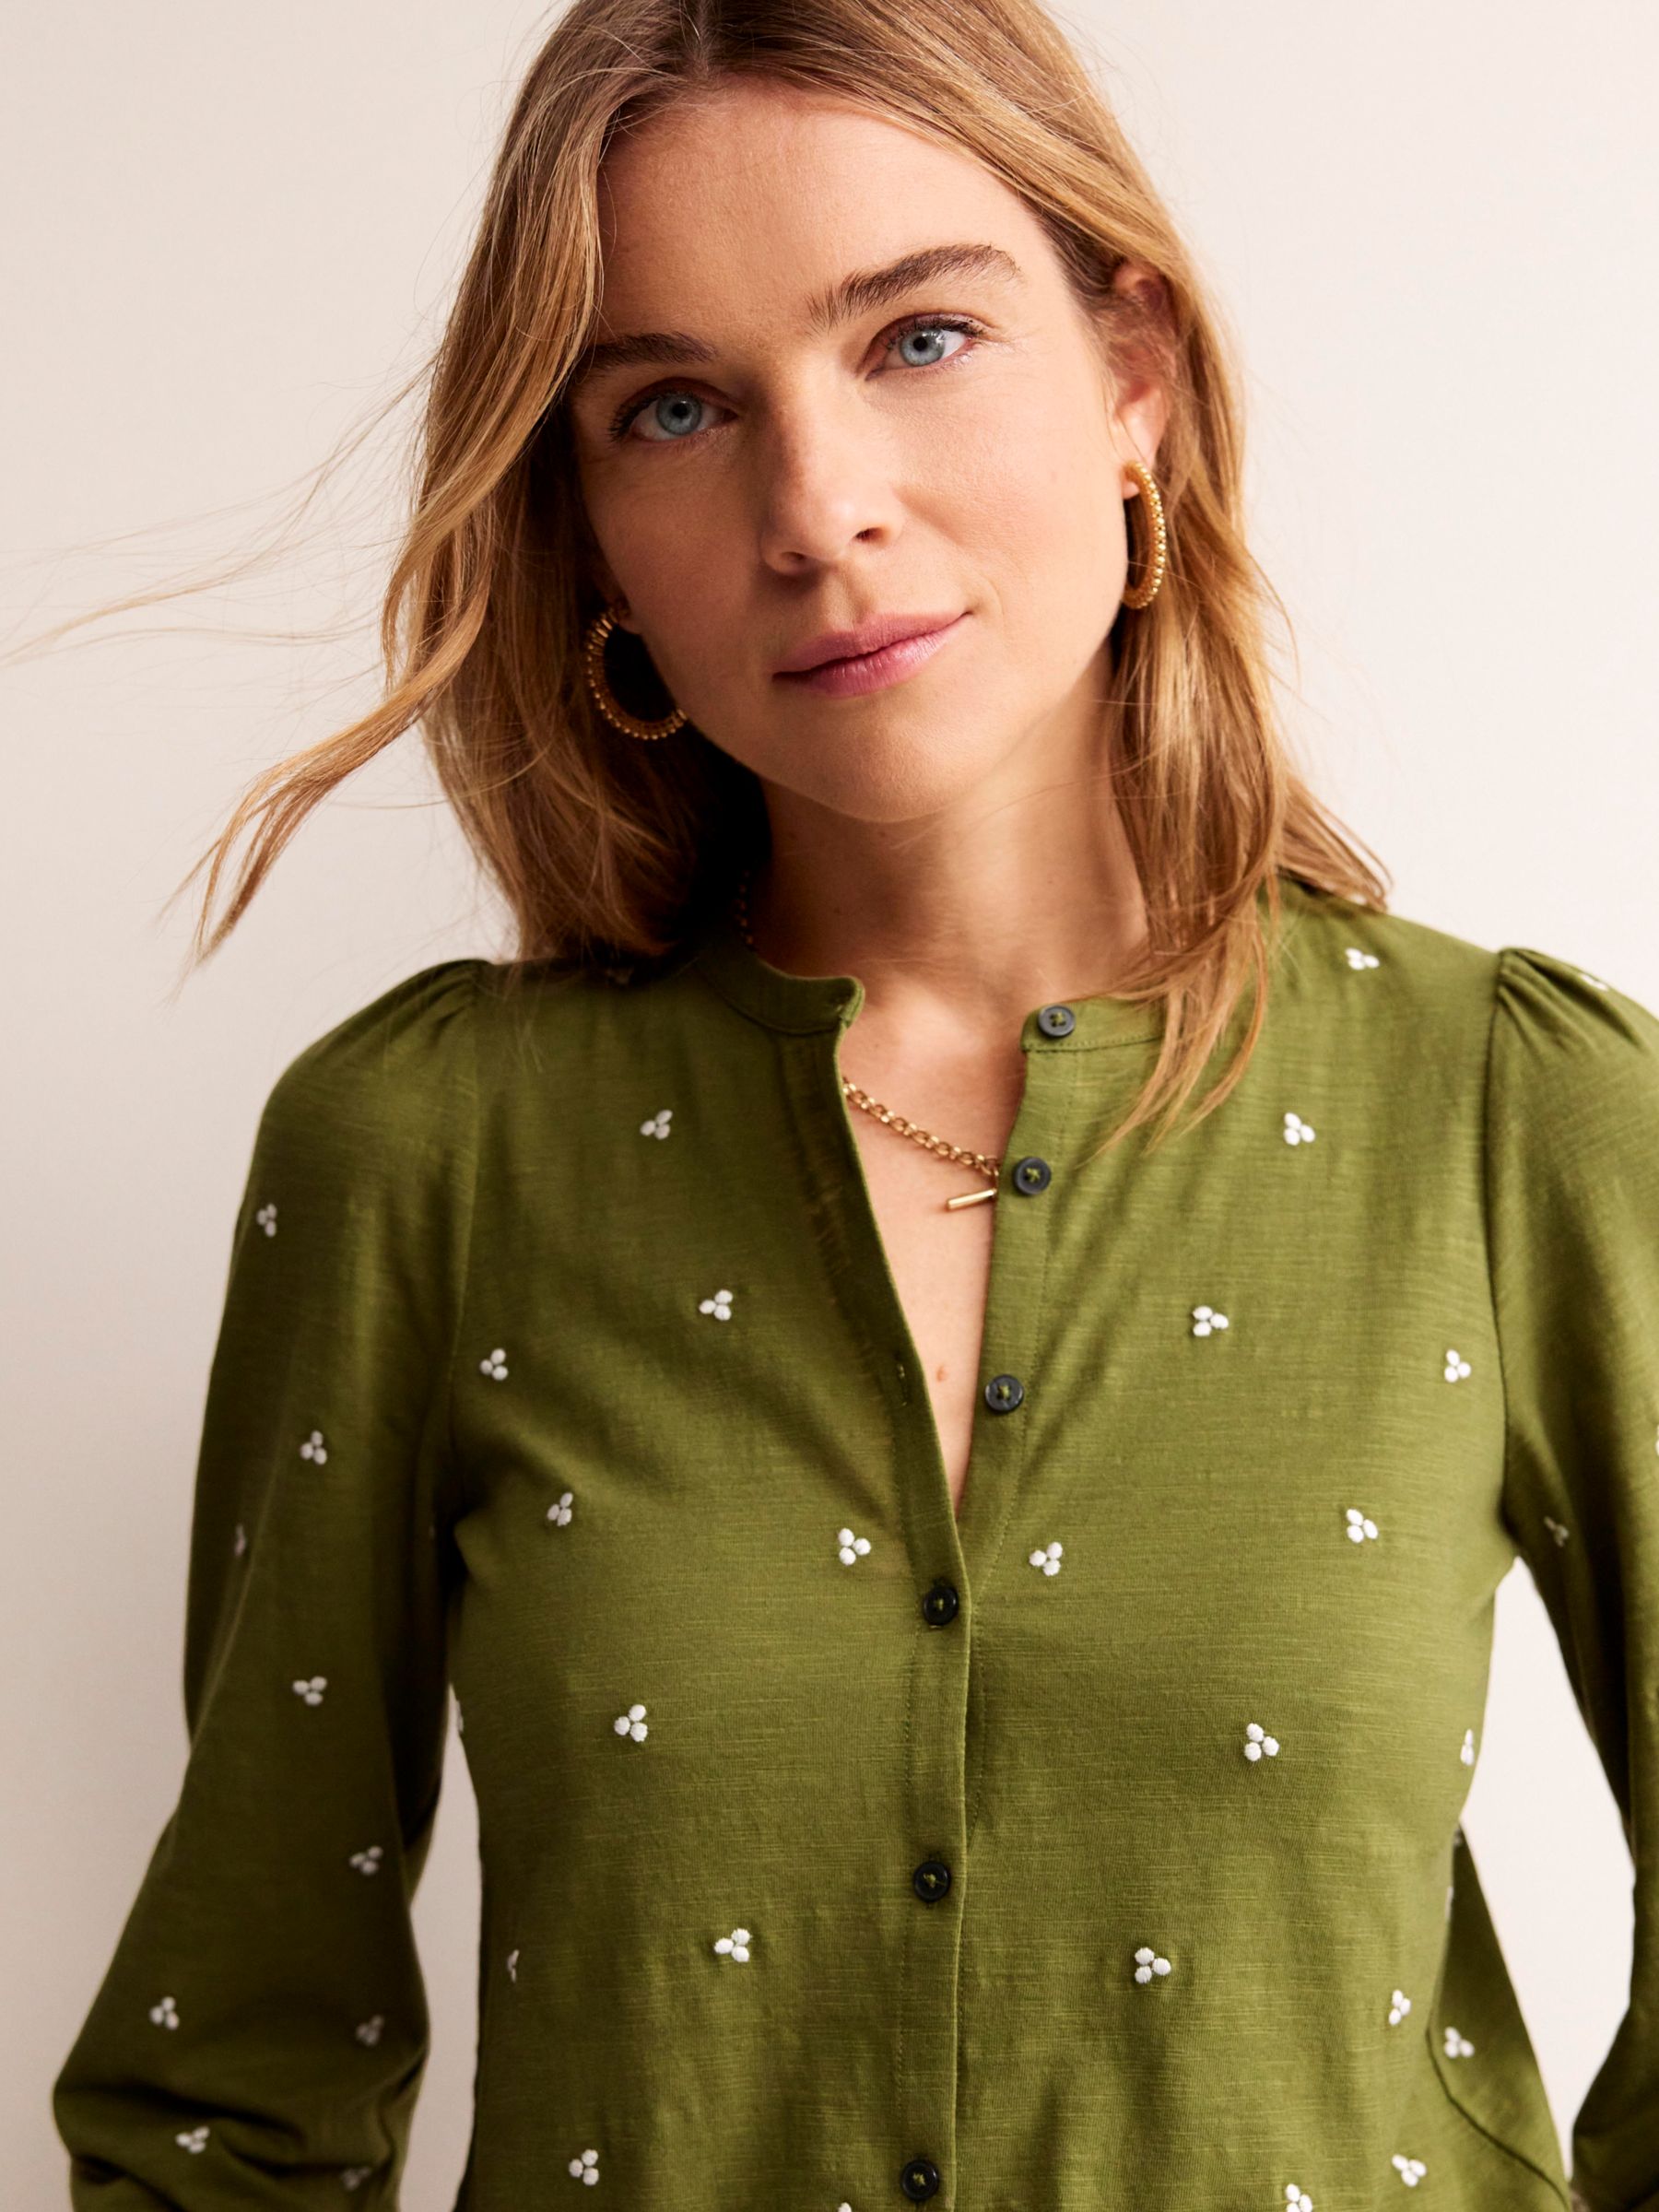 Buy Boden Marina Embroidered Cotton Blouse, Mayfly Online at johnlewis.com